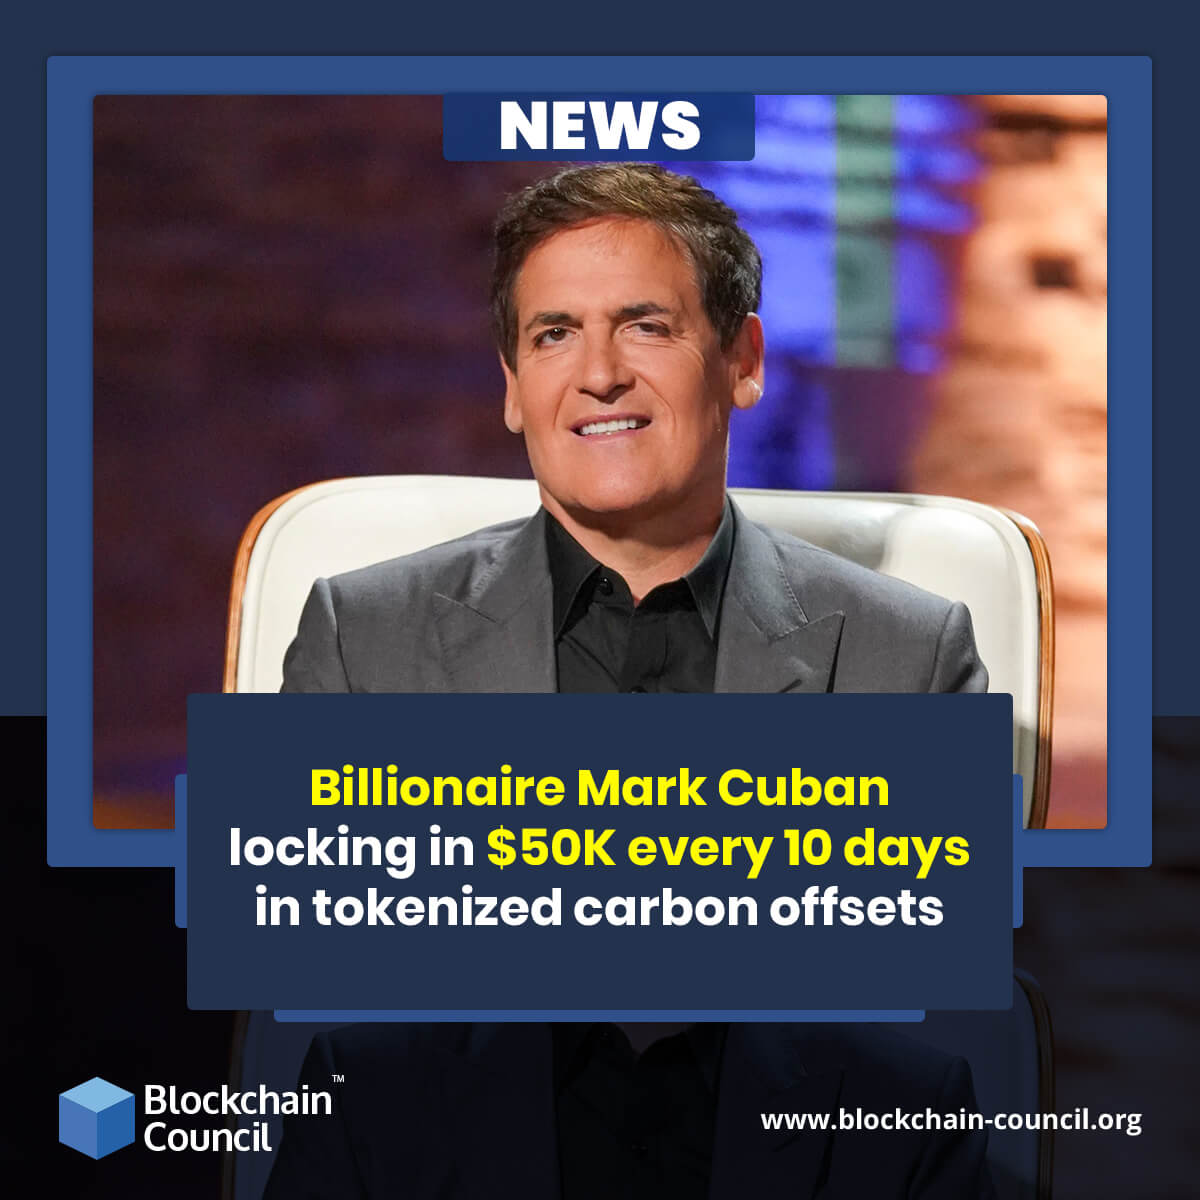 Billionaire Mark Cuban locking in $50K every 10 days in tokenized carbon offsets